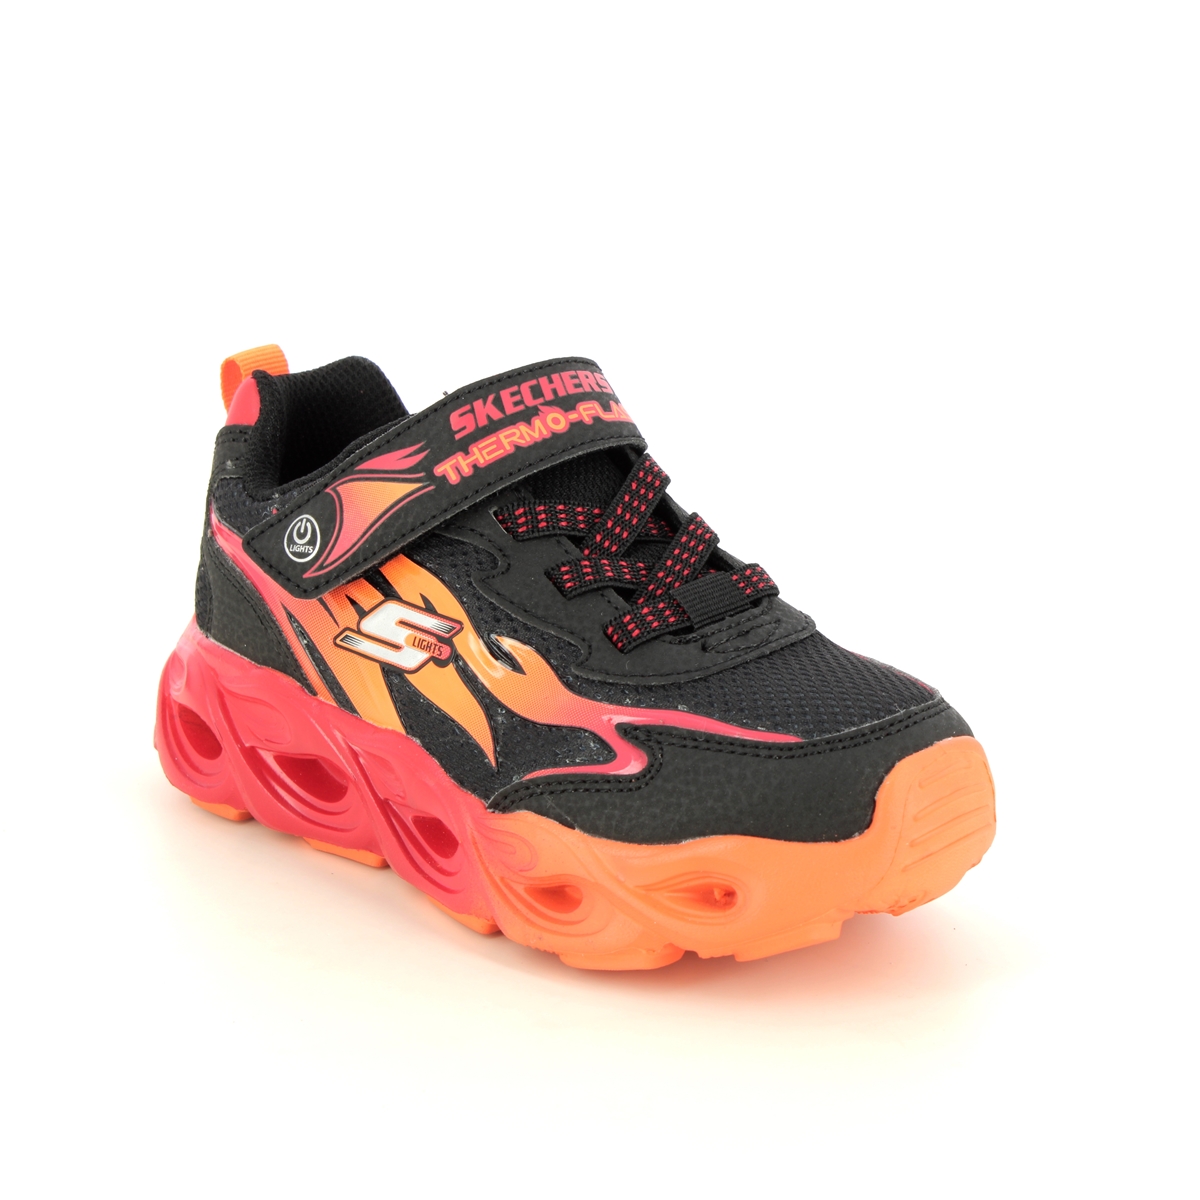 Skechers Thermo Flash Black Red Kids Trainers 400103L In Size 33 In Plain Black Red For kids